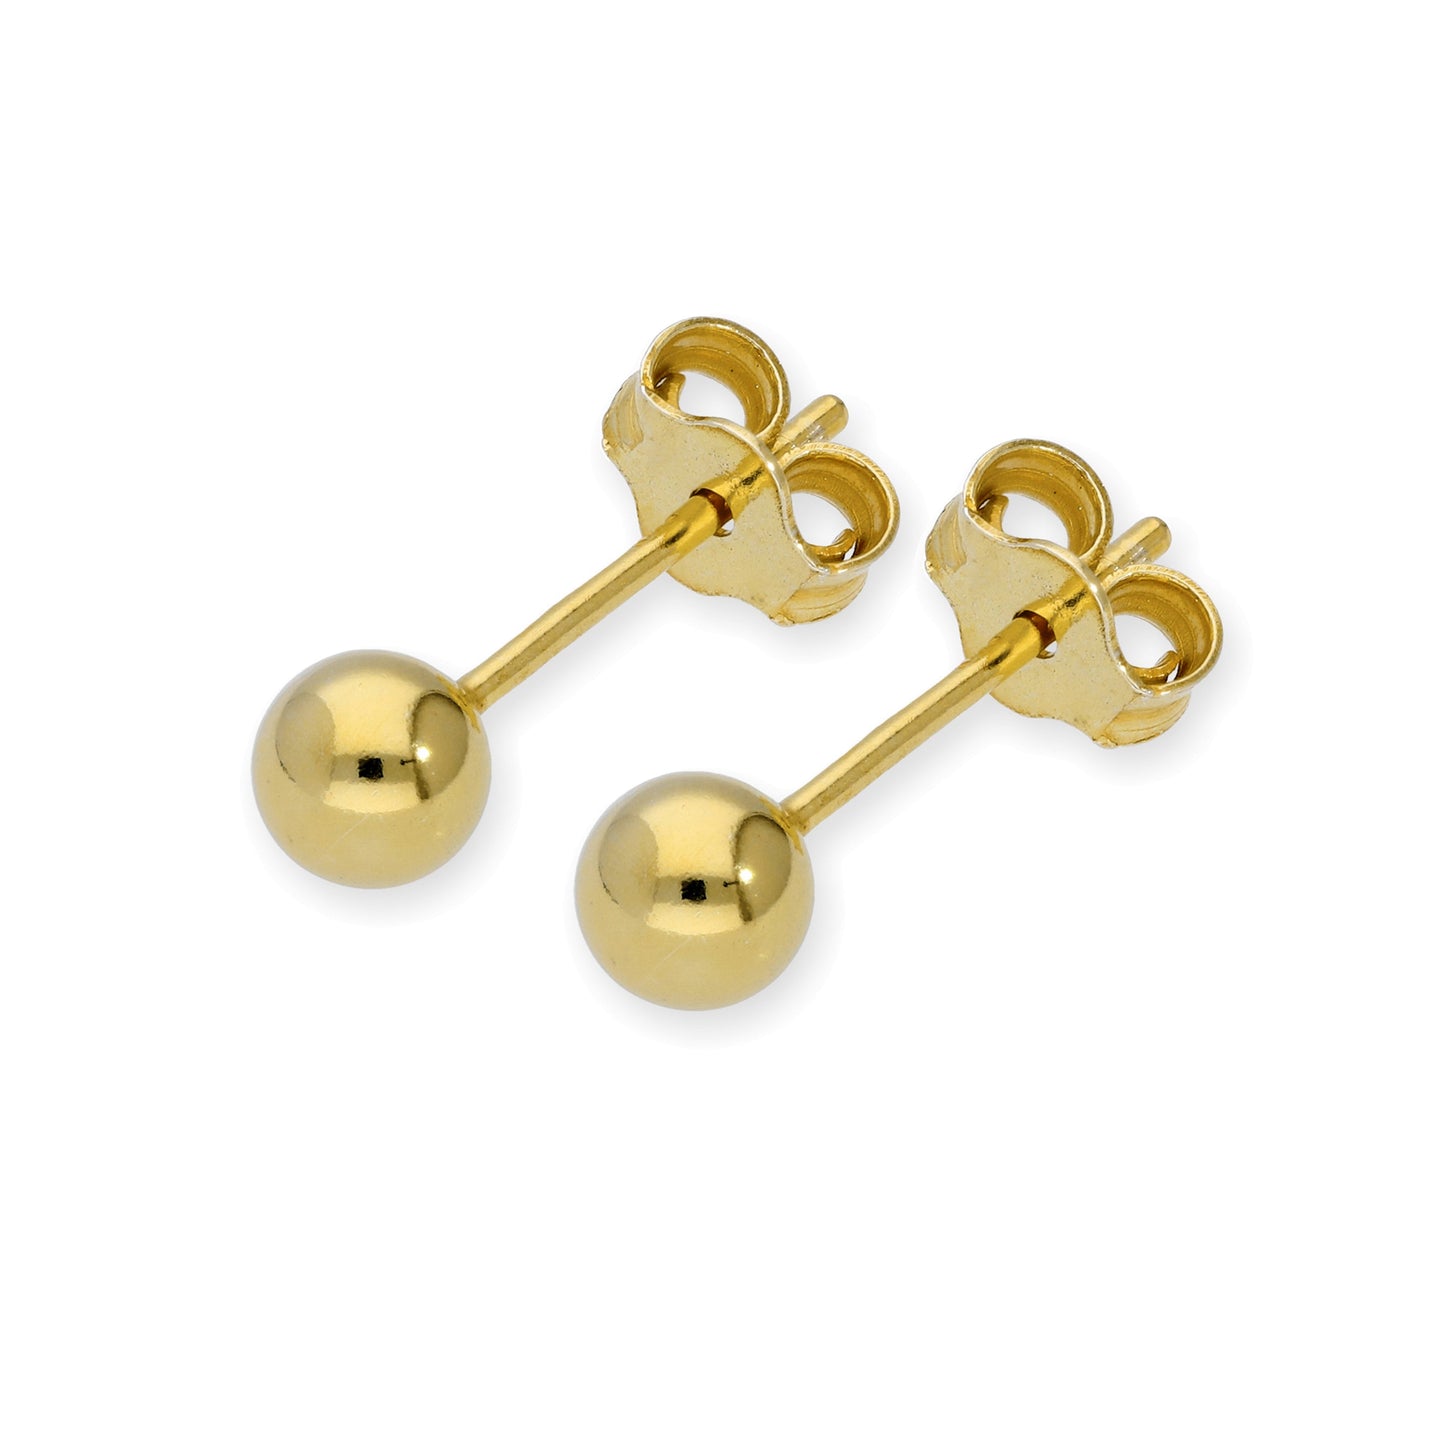 Gold Plated Small Sterling Silver Ball Stud Earrings 2mm - 6mm & Packs